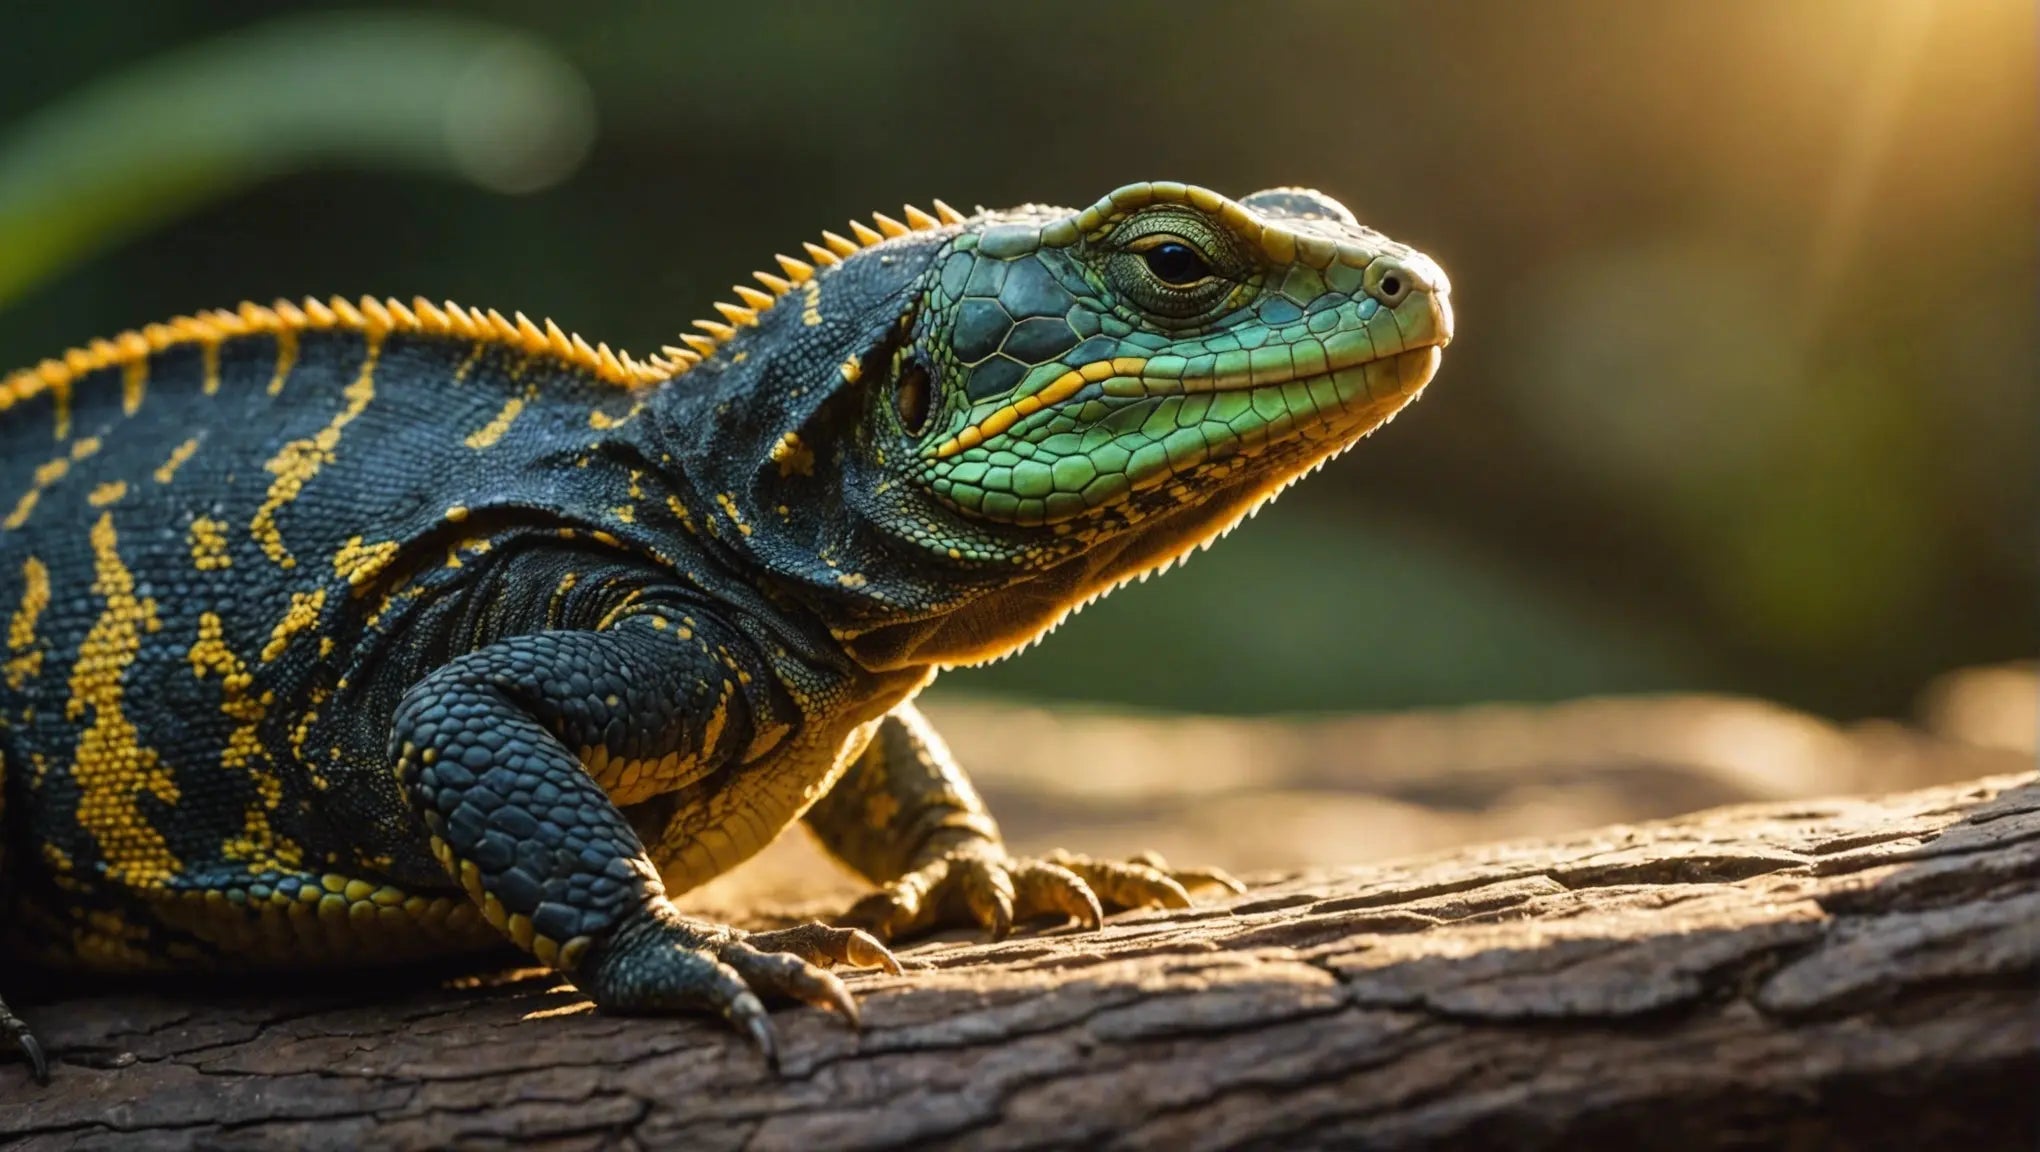 The Ultimate Arcadia Light Guide for Reptile Owners